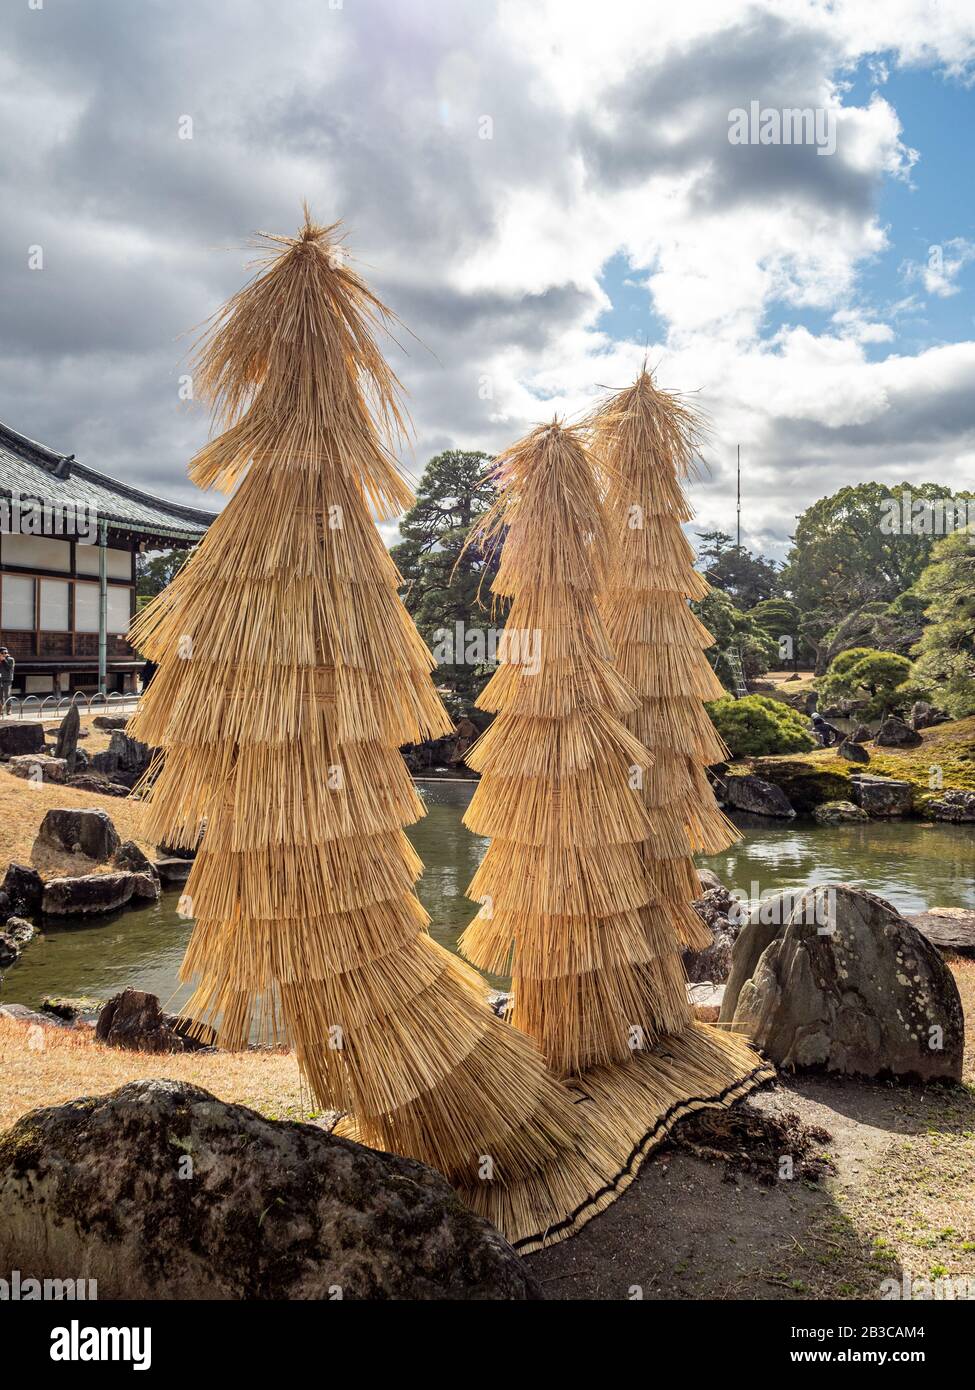 https://c8.alamy.com/comp/2B3CAM4/palm-trees-covered-with-straw-protectors-to-keep-warm-during-winter-2B3CAM4.jpg